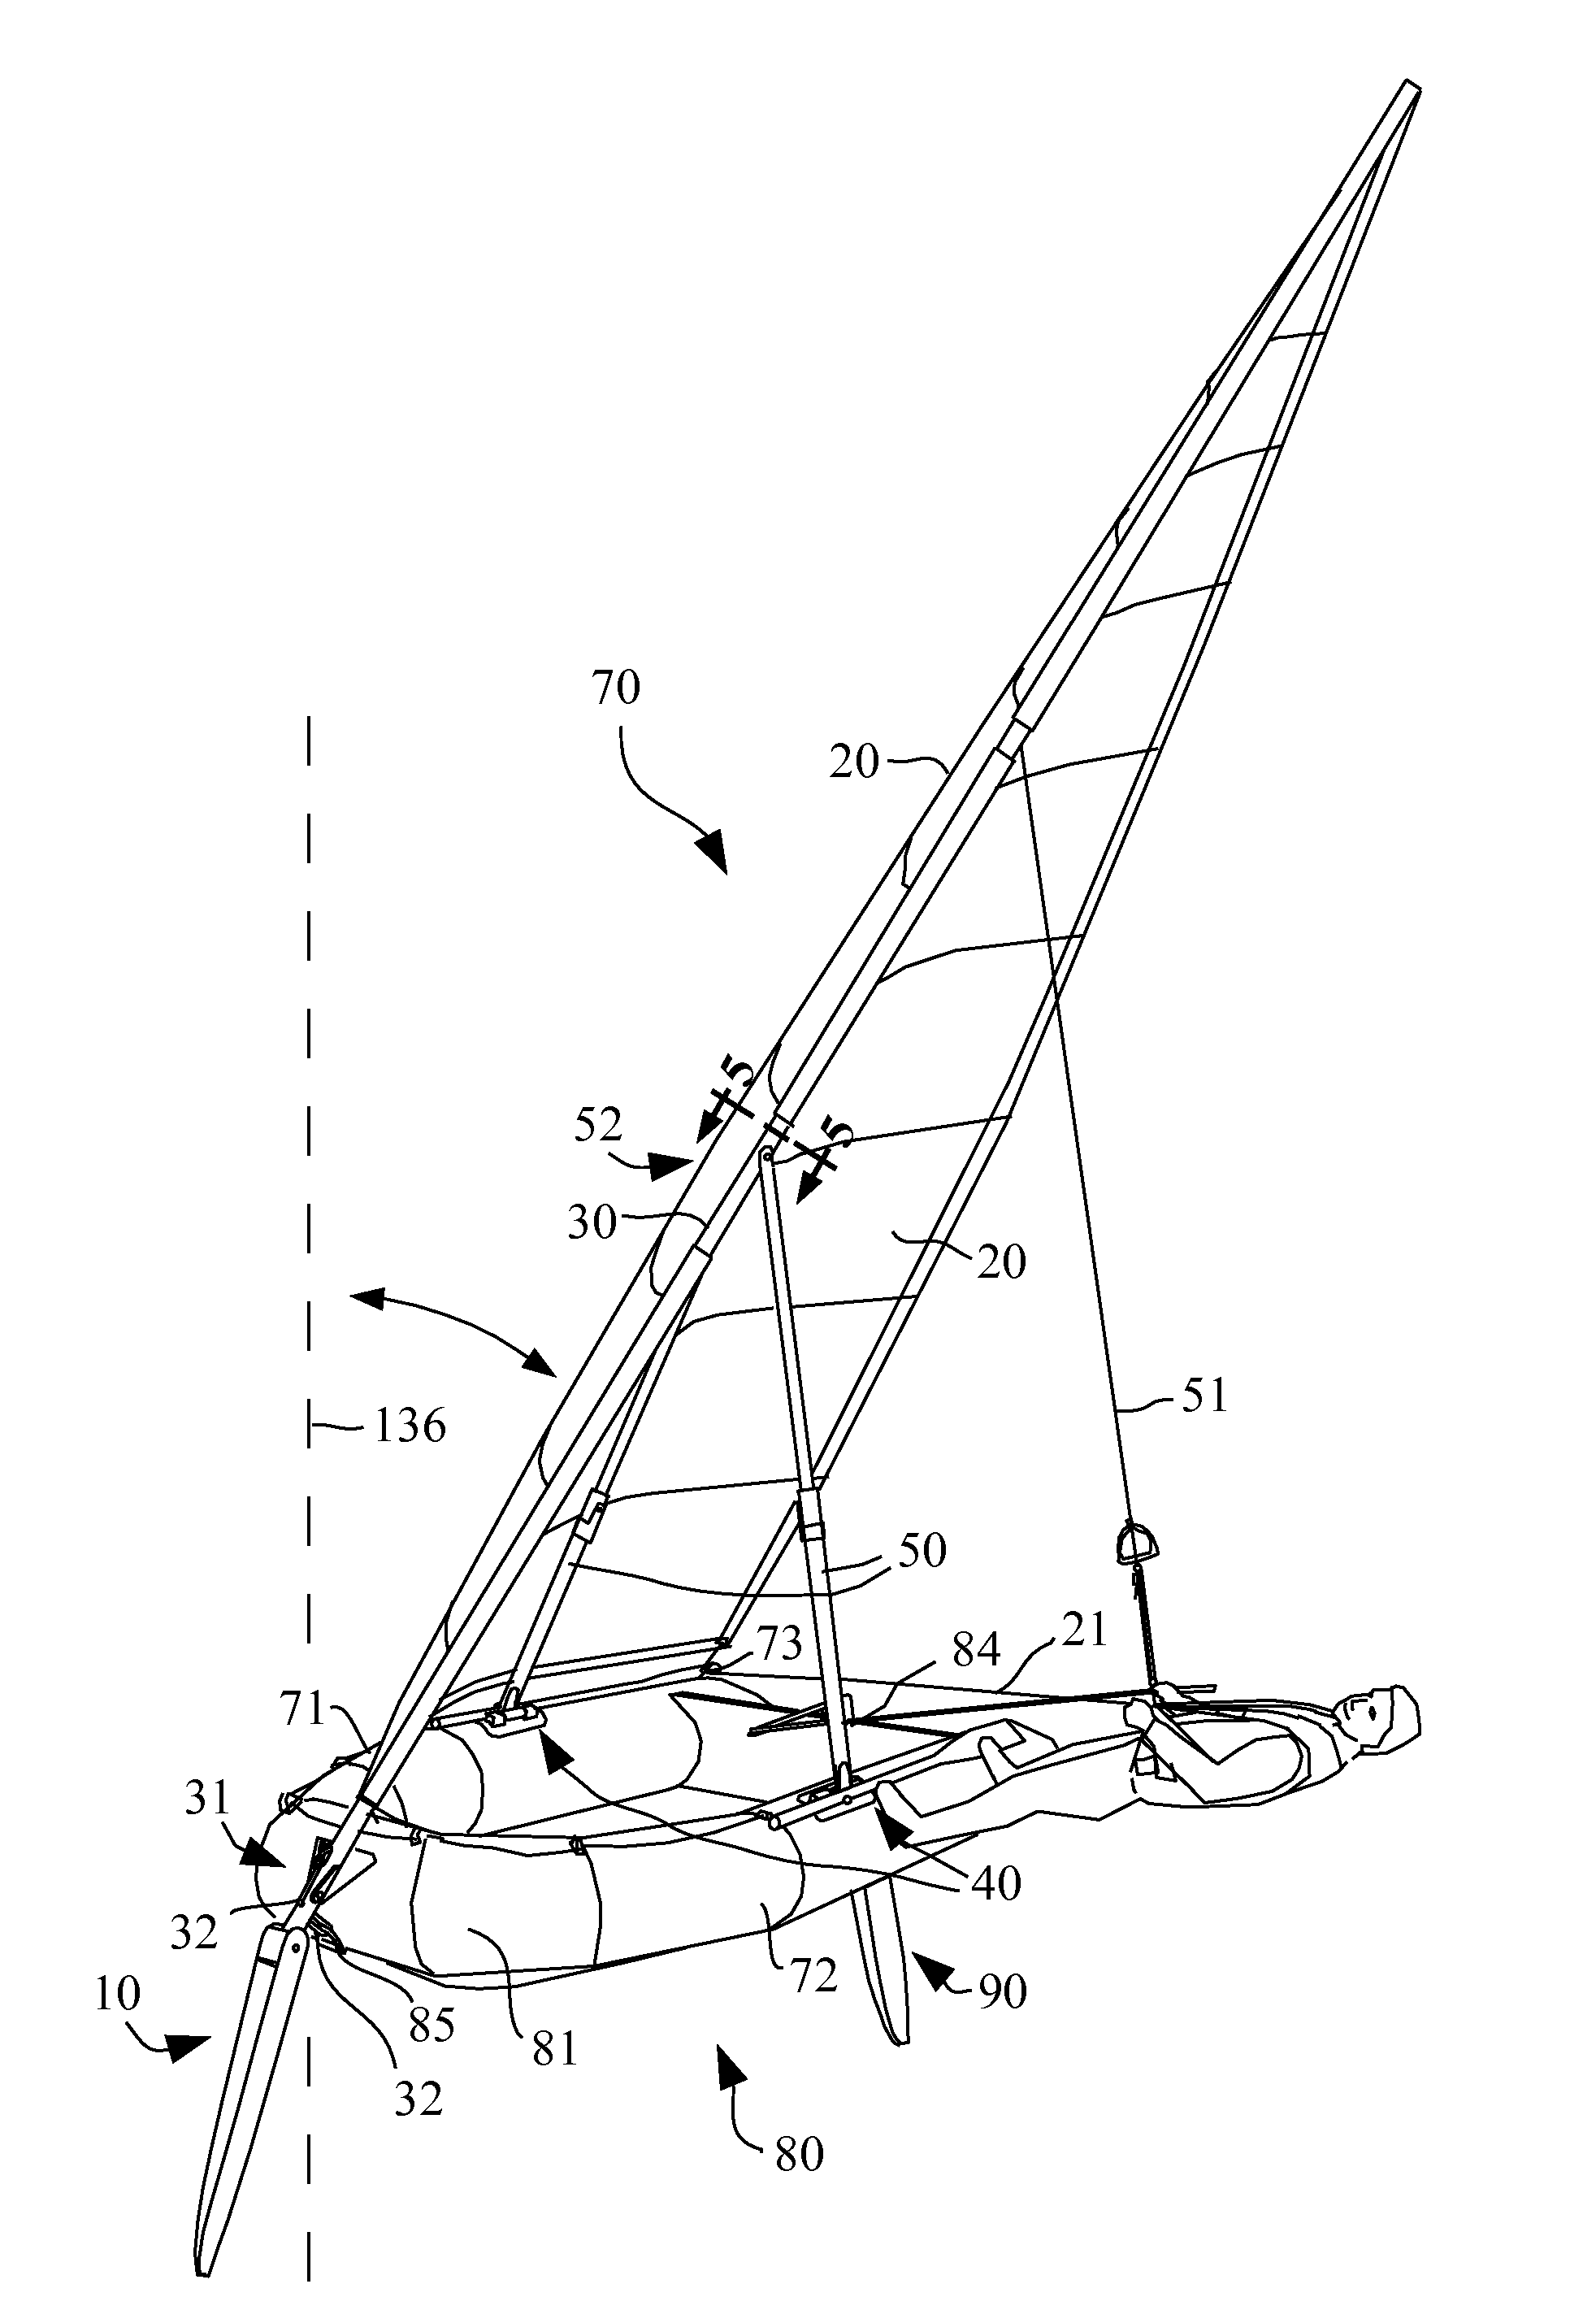 Universally attachable forward tacking sail rig with canting integrated mast and water foil for all boats